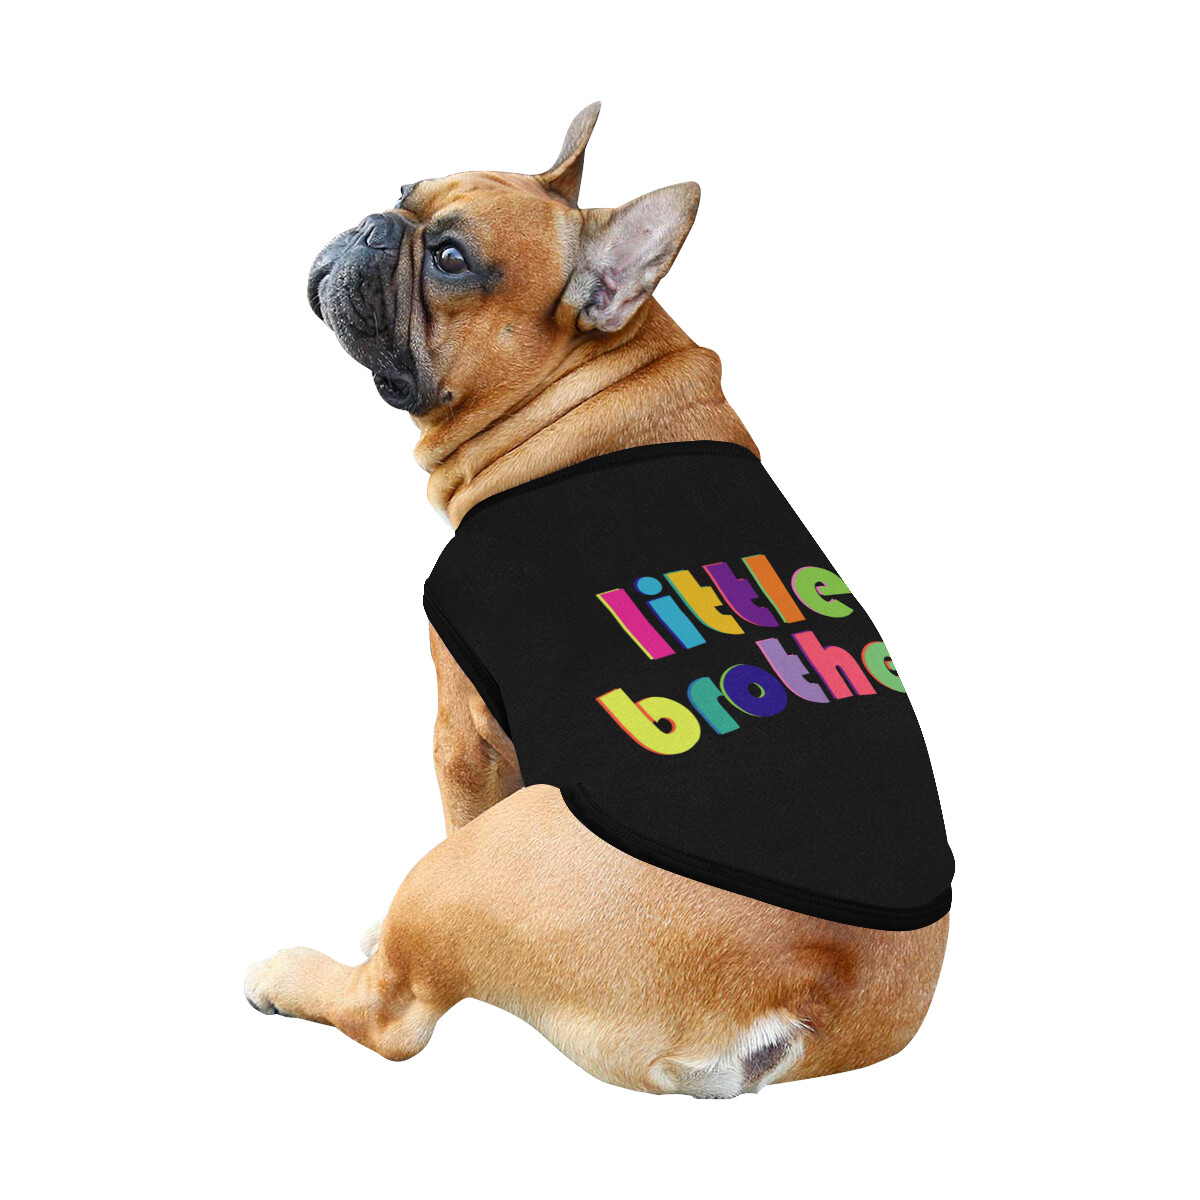 🐕 Little Brother Dog Tank Top, Dog shirt, Dog clothes, Gifts, front back print, 7 sizes XS to 3XL, dog t-shirt, dog t-shirt, dog gift, black